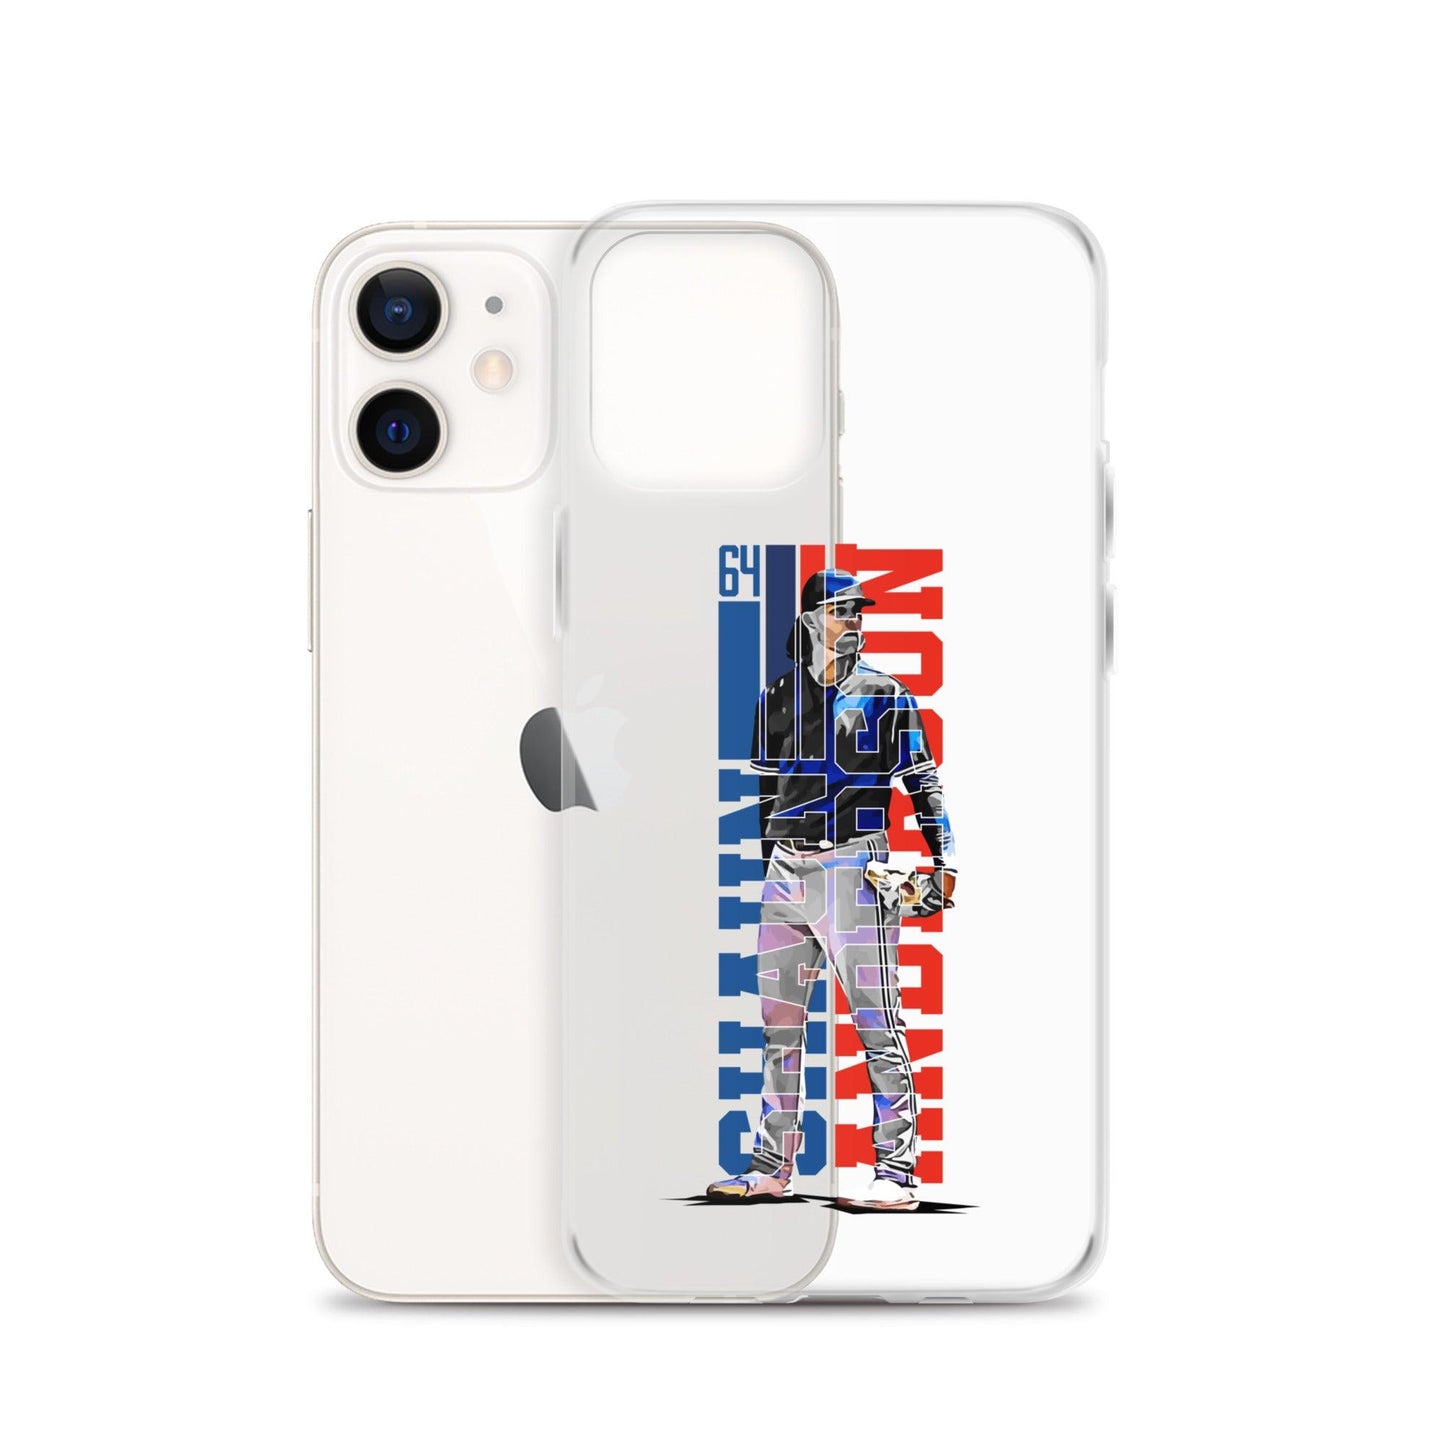 Shaun Anderson “Essential” iPhone Case - Fan Arch